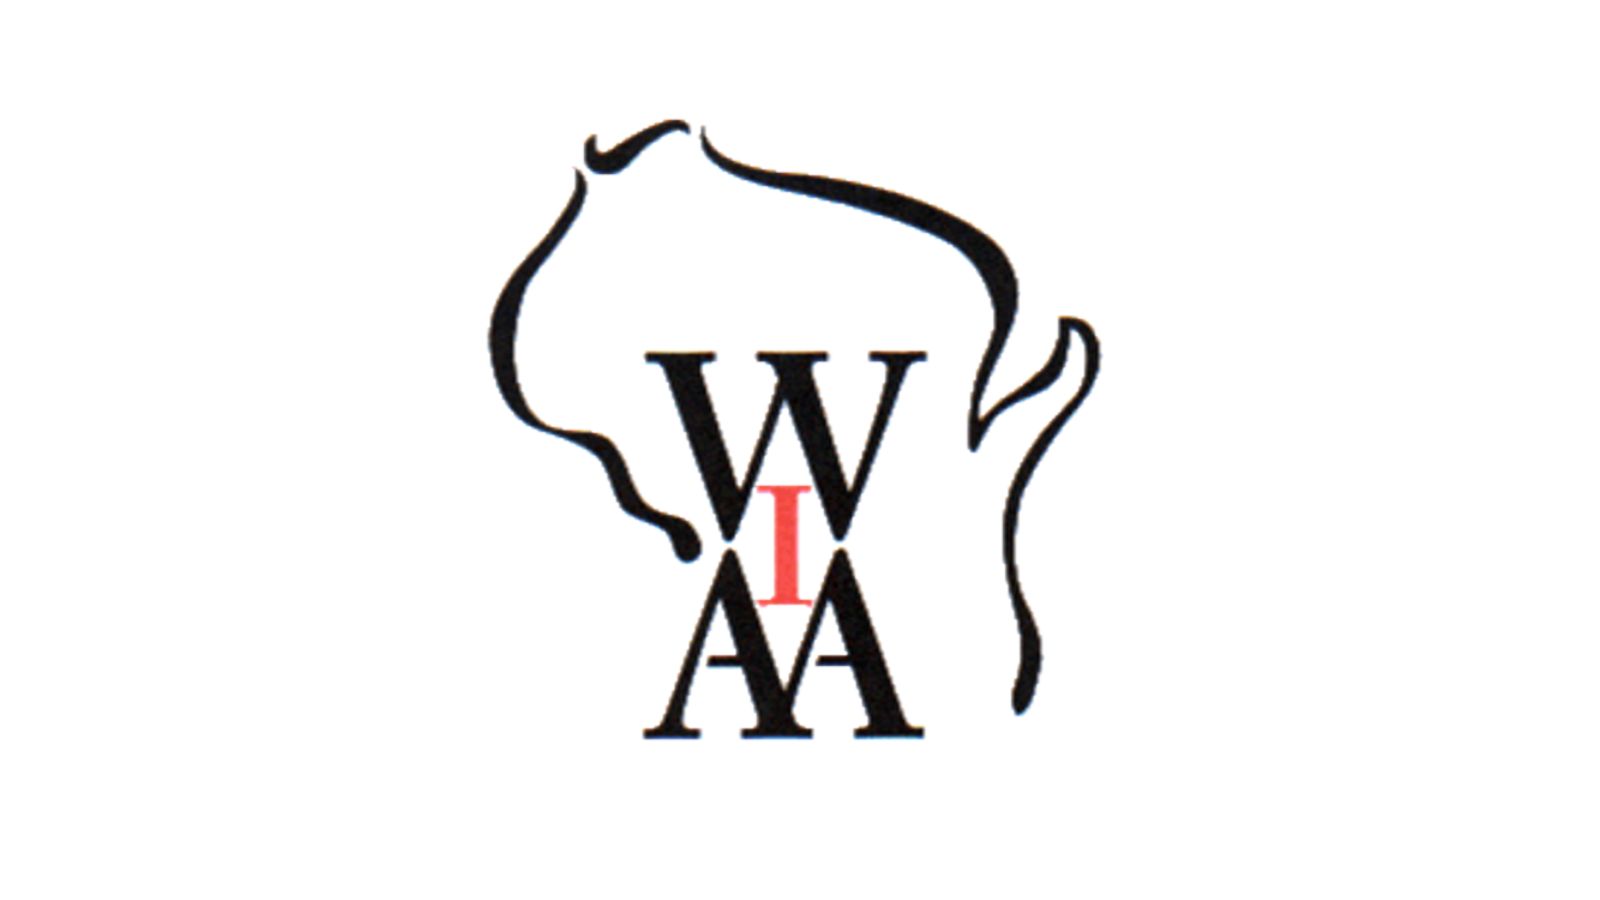 Competitive balance plan passed at WIAA Annual Meeting